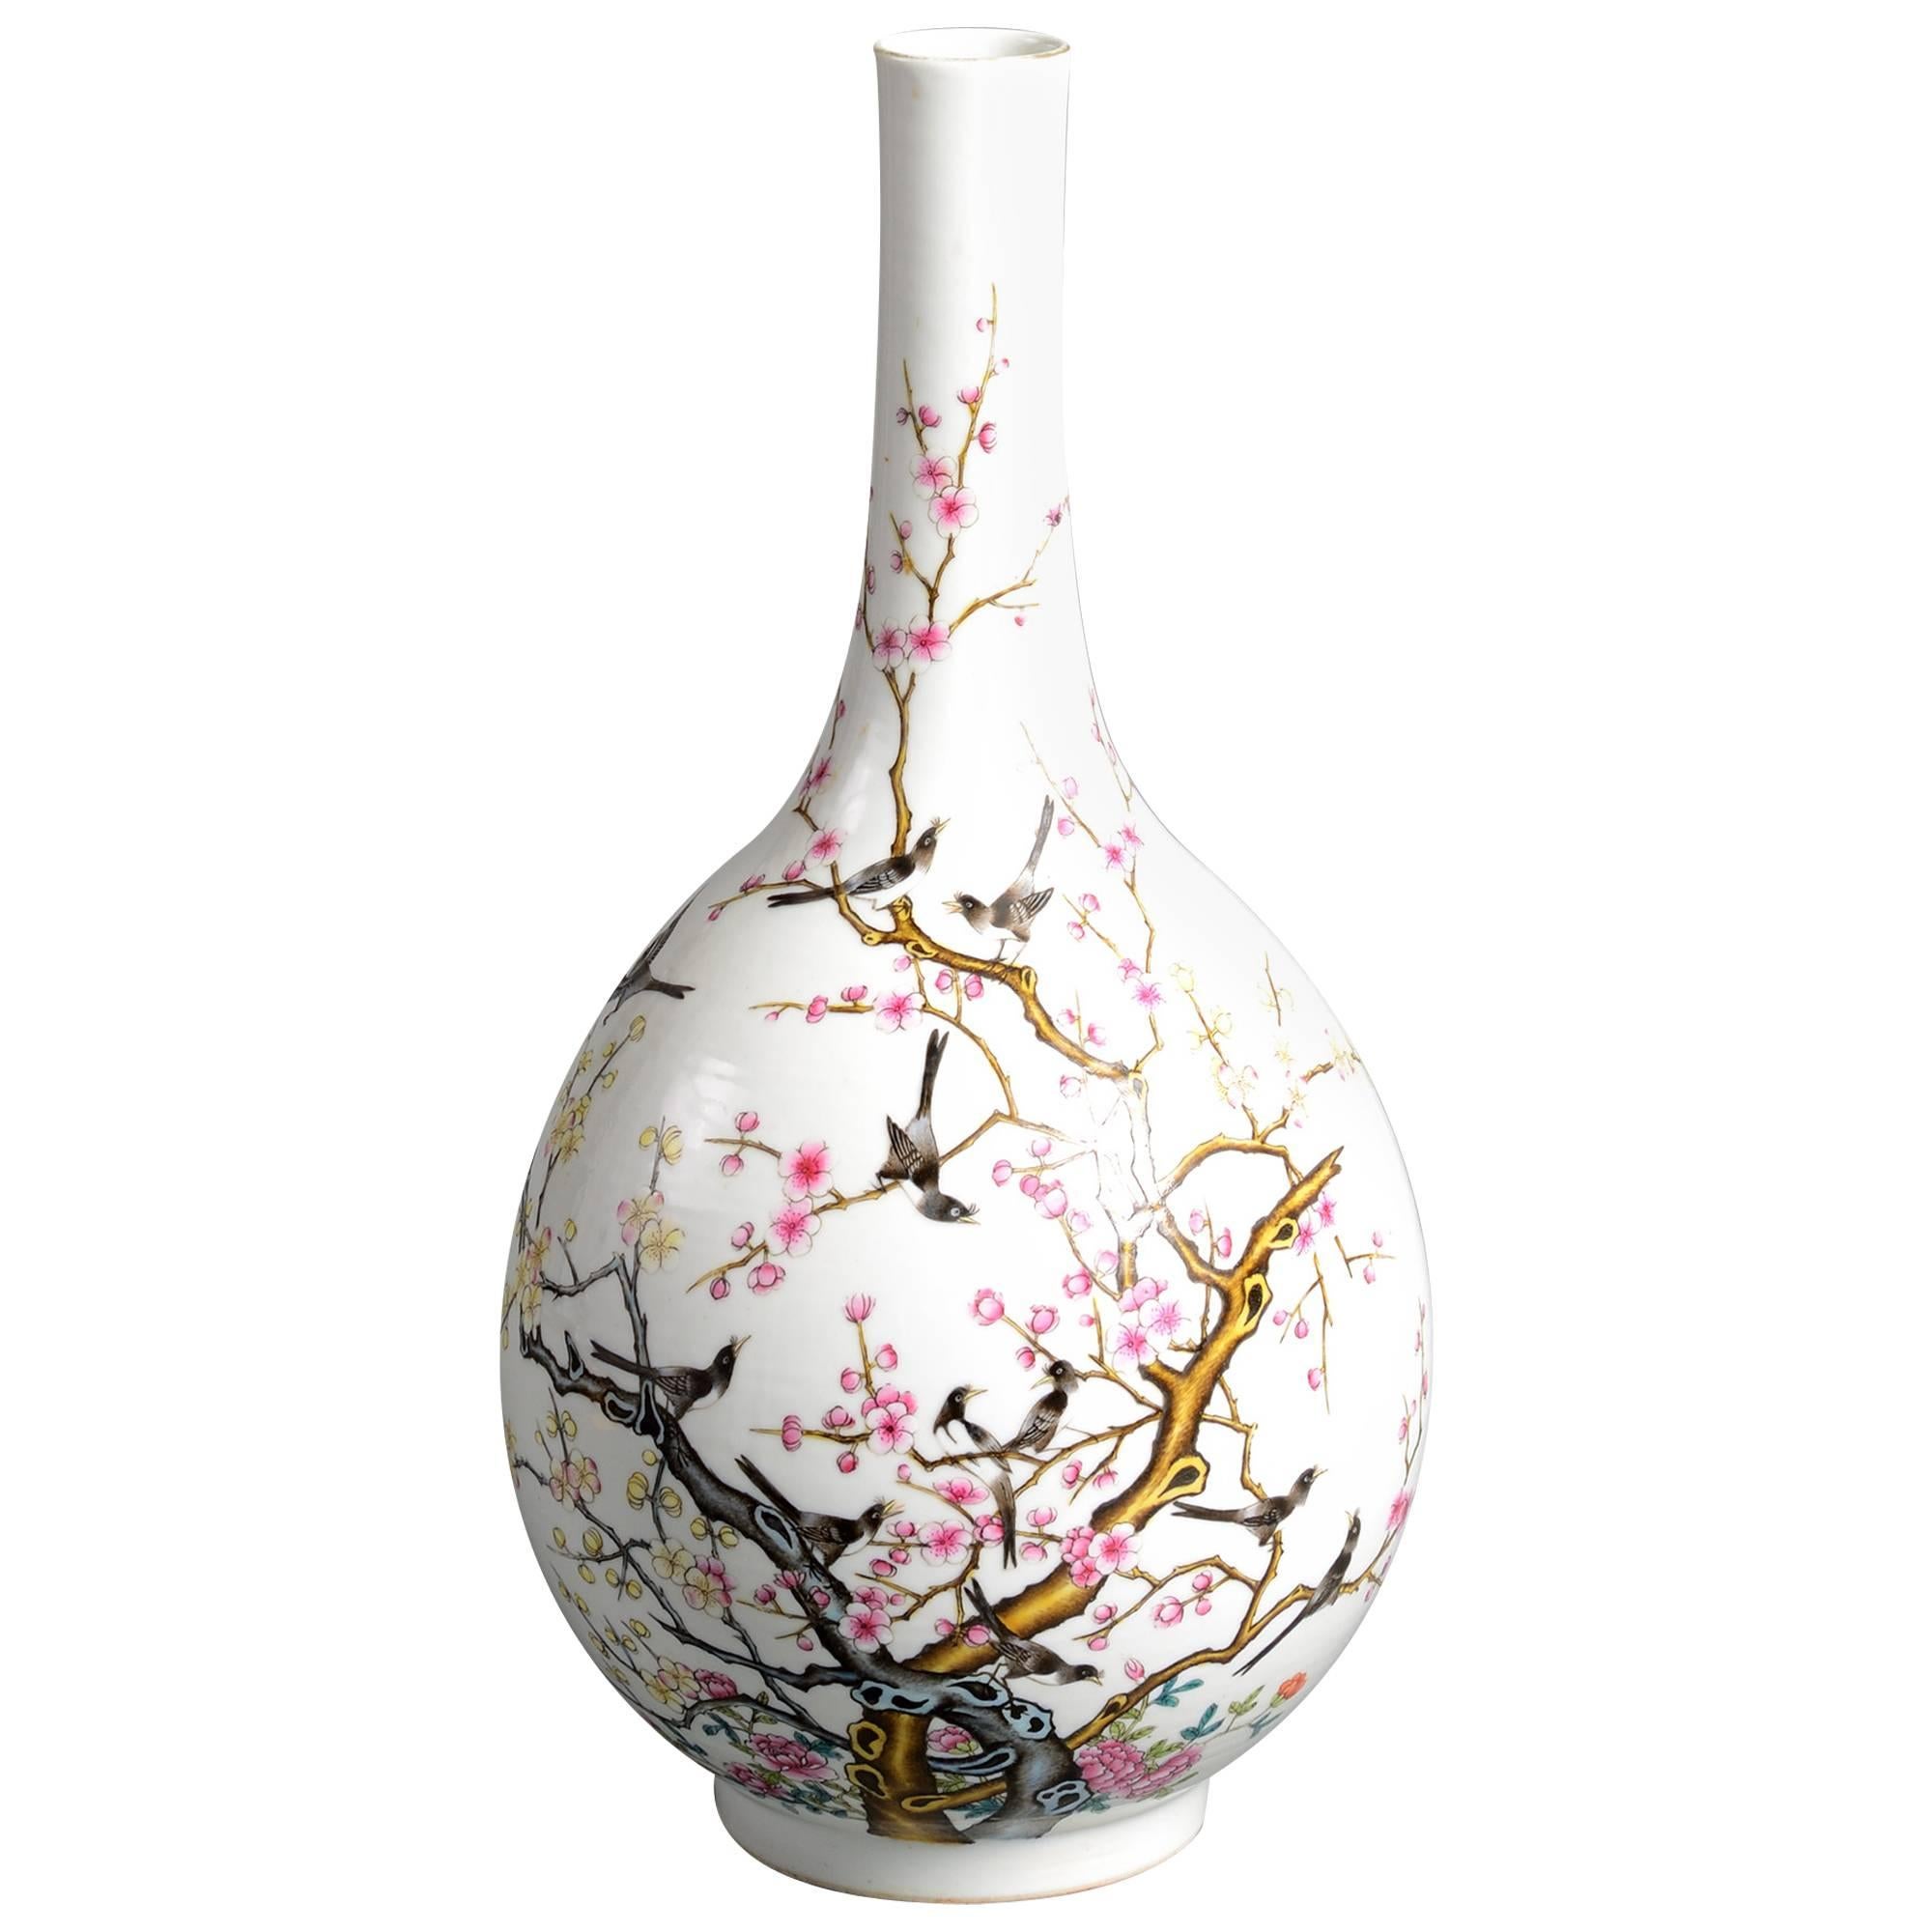 19th Century Qing Famille Rose Bottle Vase with flowering prunus tree and birds